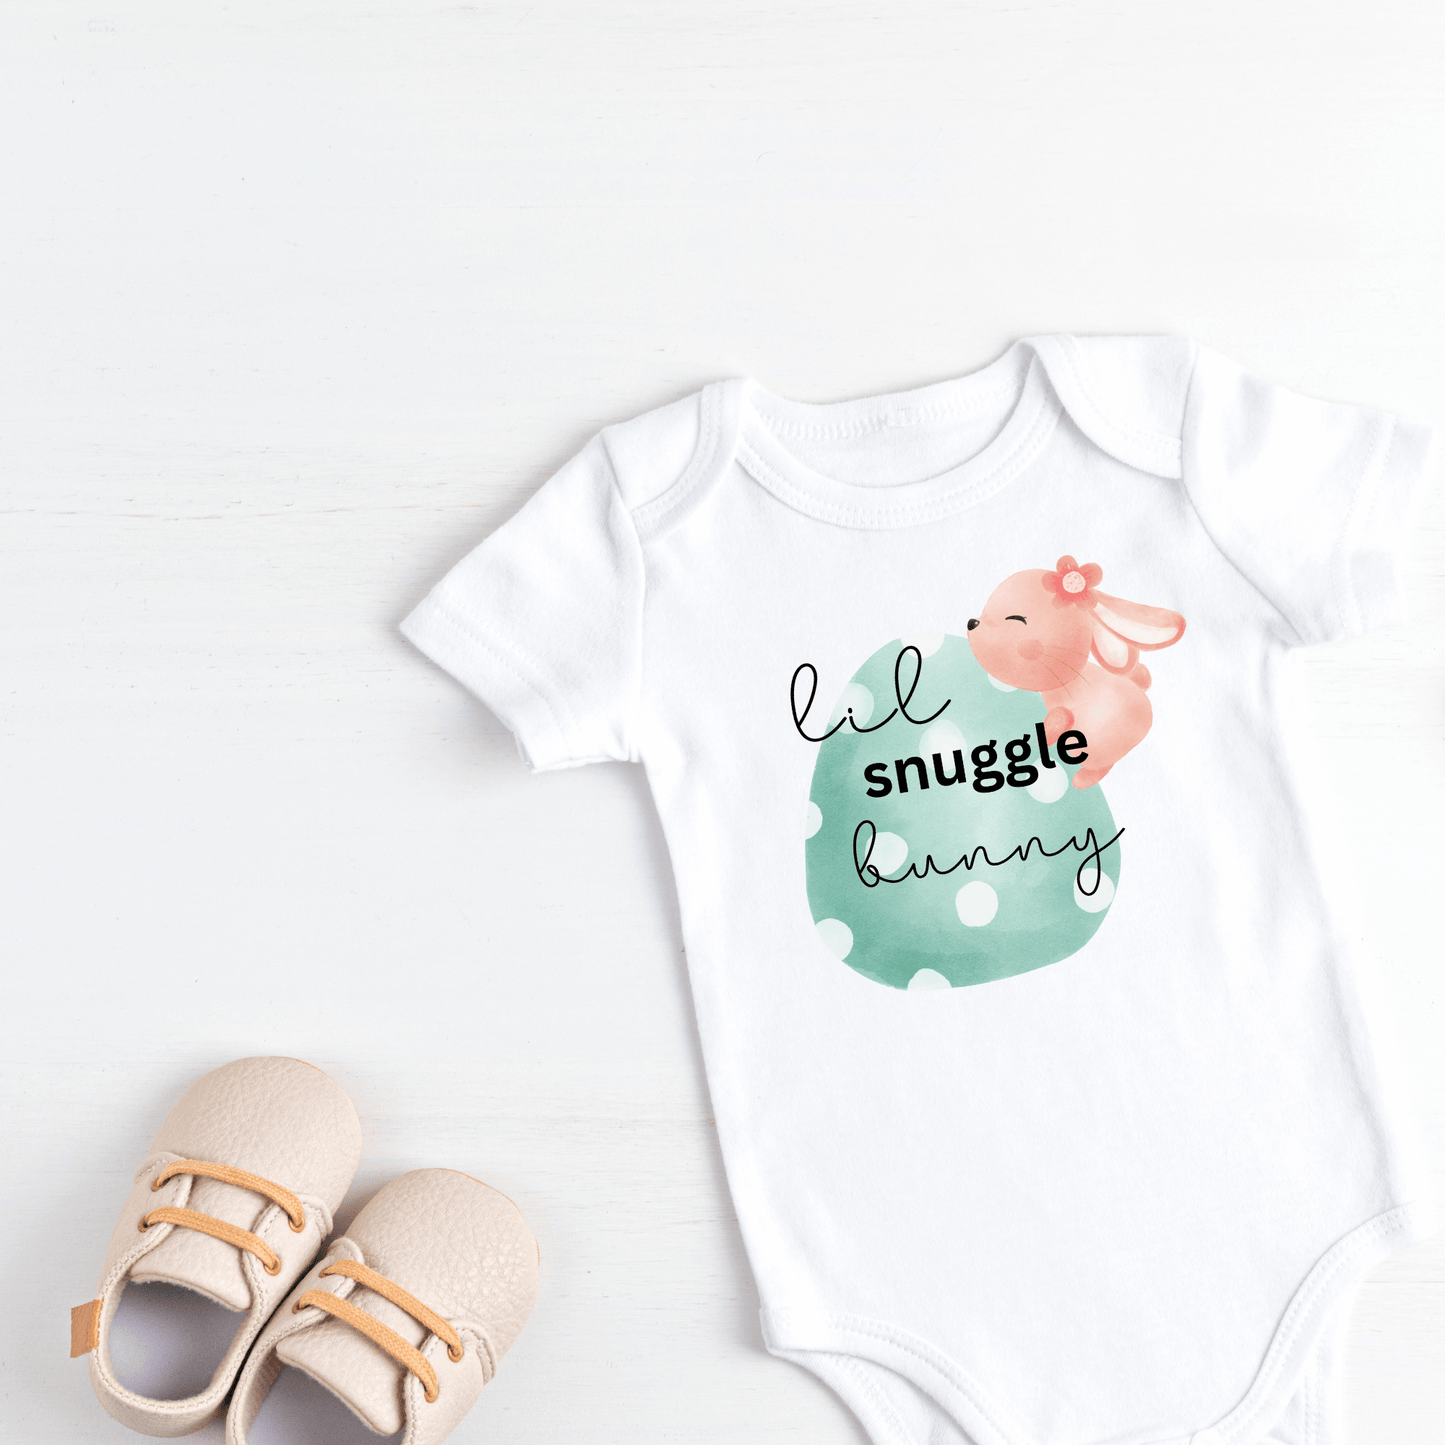 Easter baby clothes, baby easter romper, easter clothing, what to wear for easter, good gift for a baby's first easter, how do you celebrate Easter with a baby, lil snuggle bunny, rabbit cute modern kid clothing